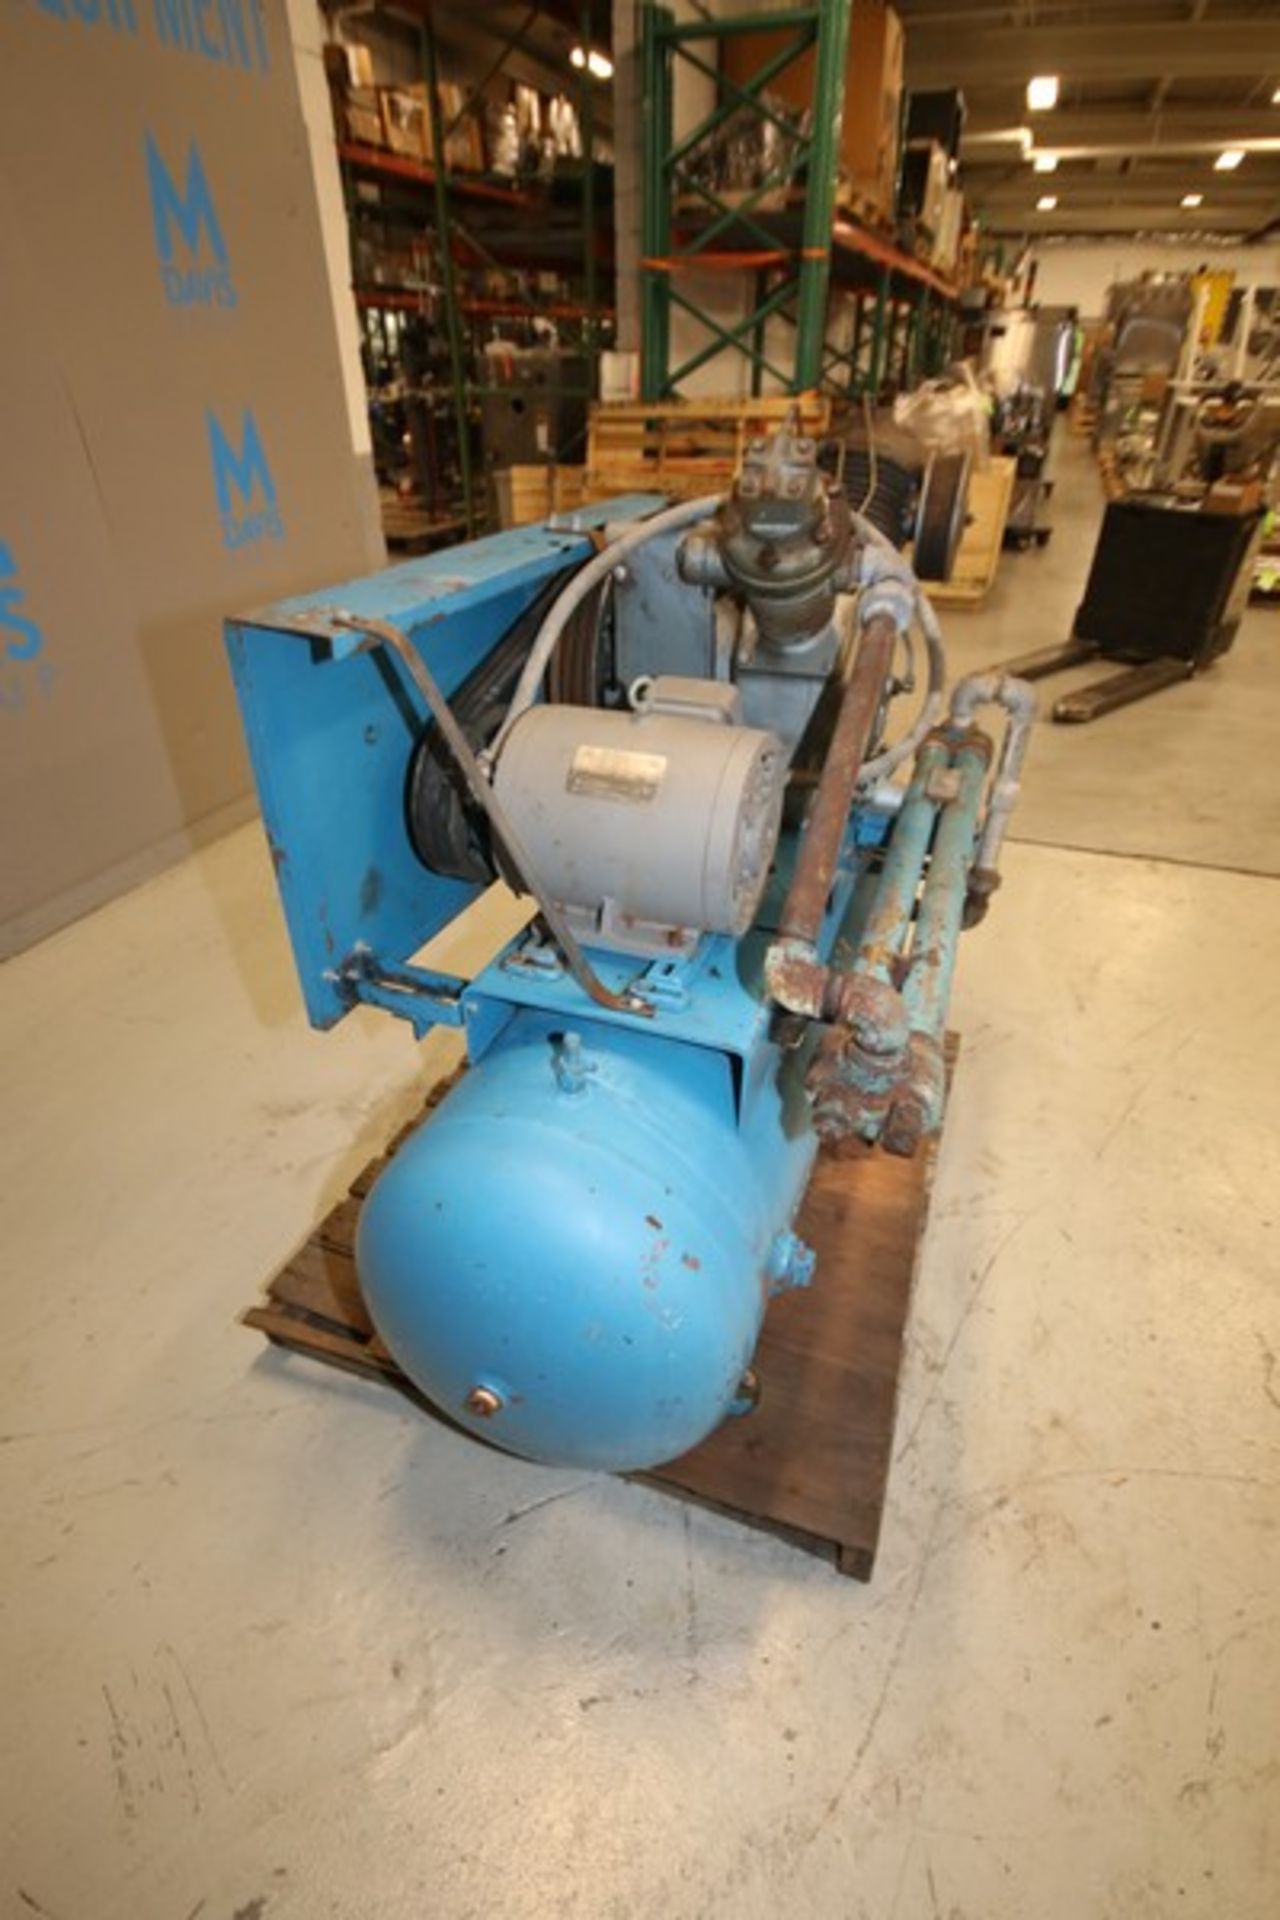 Ingersoll Rand 10 hp Reciprocating Air Compressor,Model 71T4, SN 276537, 1740 rpm, 230/460V, Mounted - Image 7 of 7